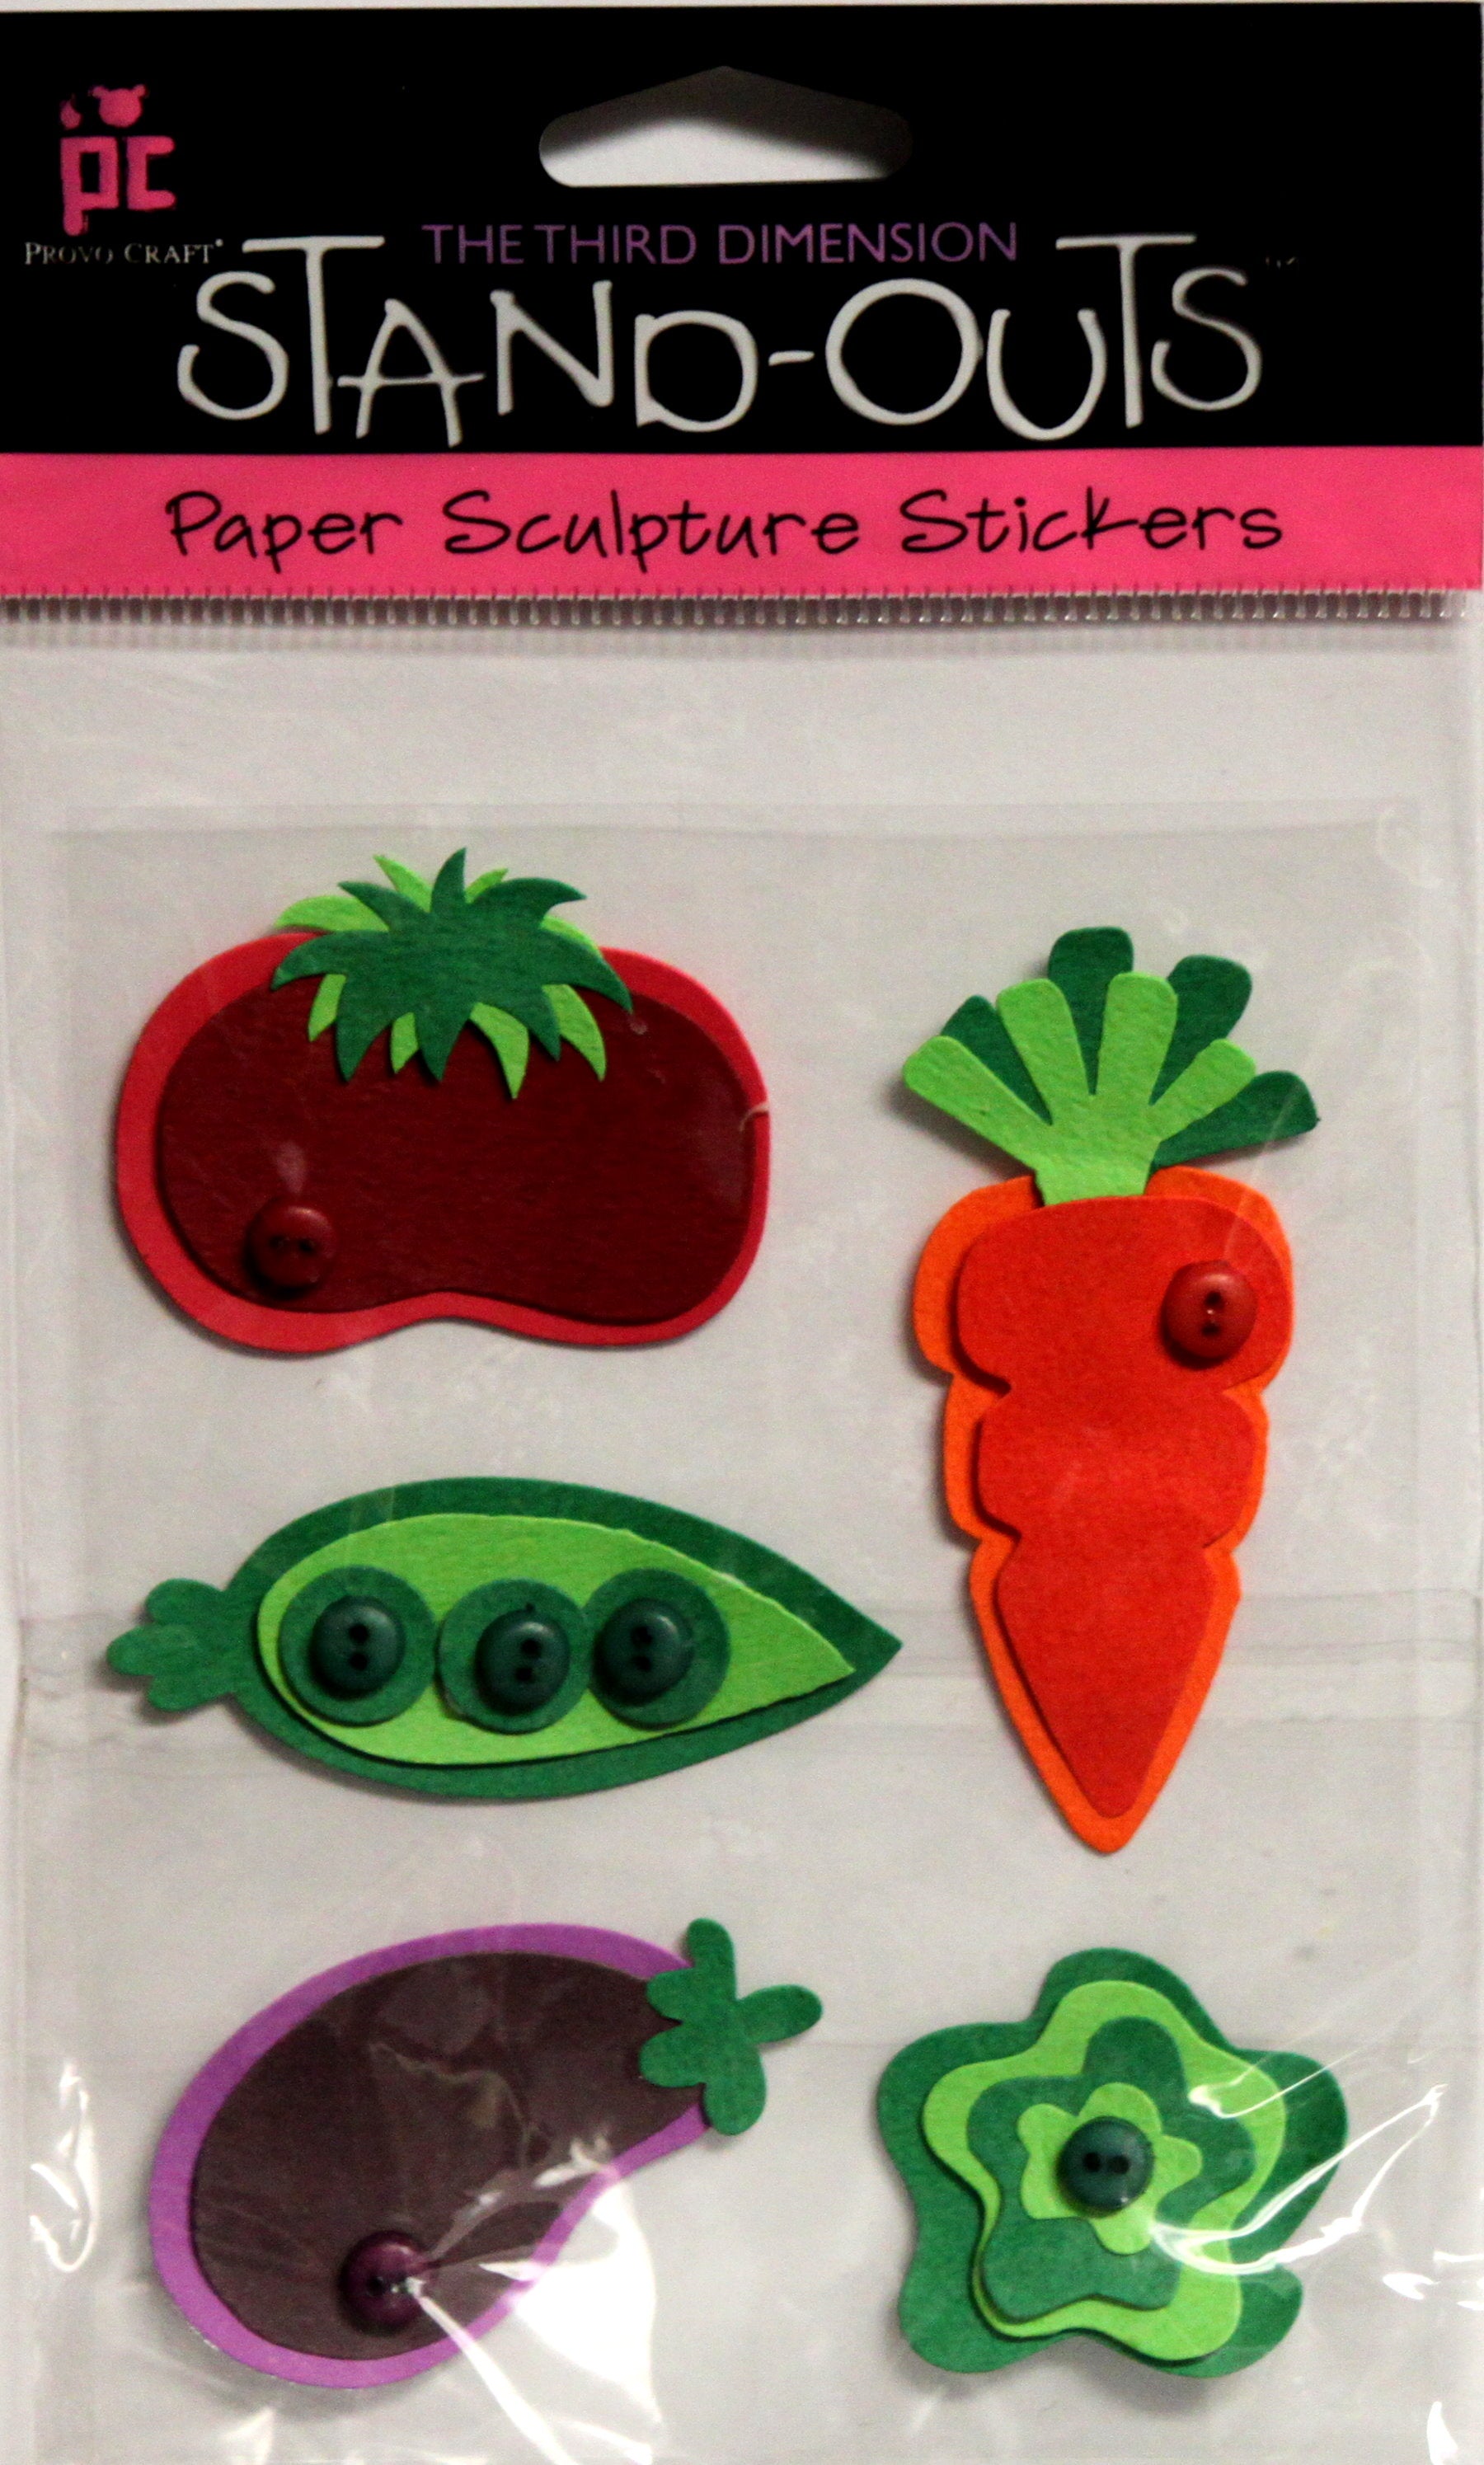 Provo Craft Veggie Garden Stand-outs Dimensional Paper Sculpture Stickers